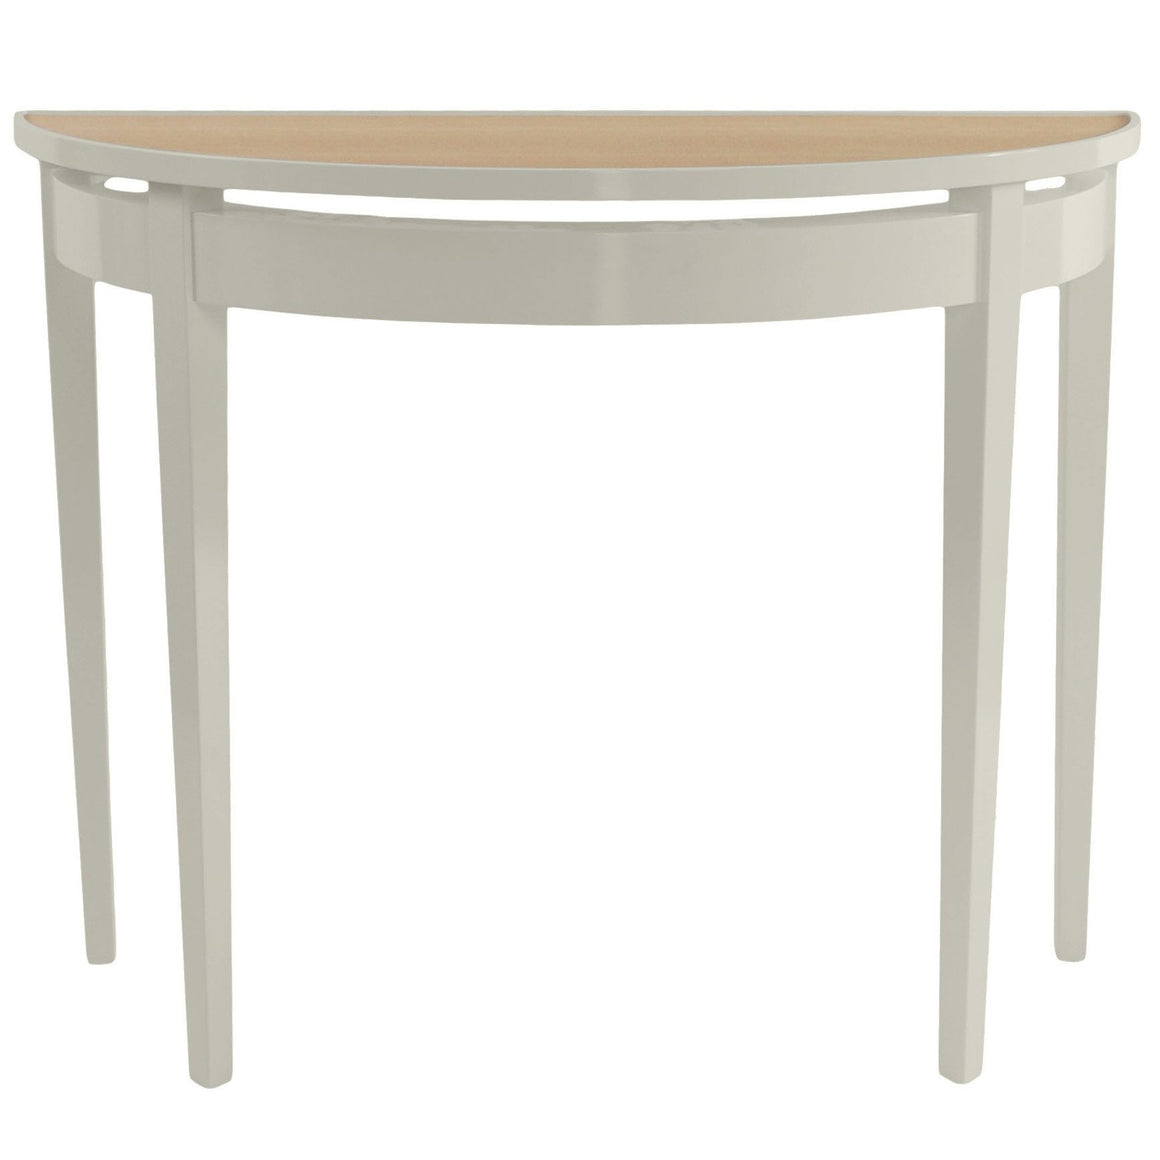 Demilune Lacquer Console Table - Fawn Grey (Additional Colors Available)